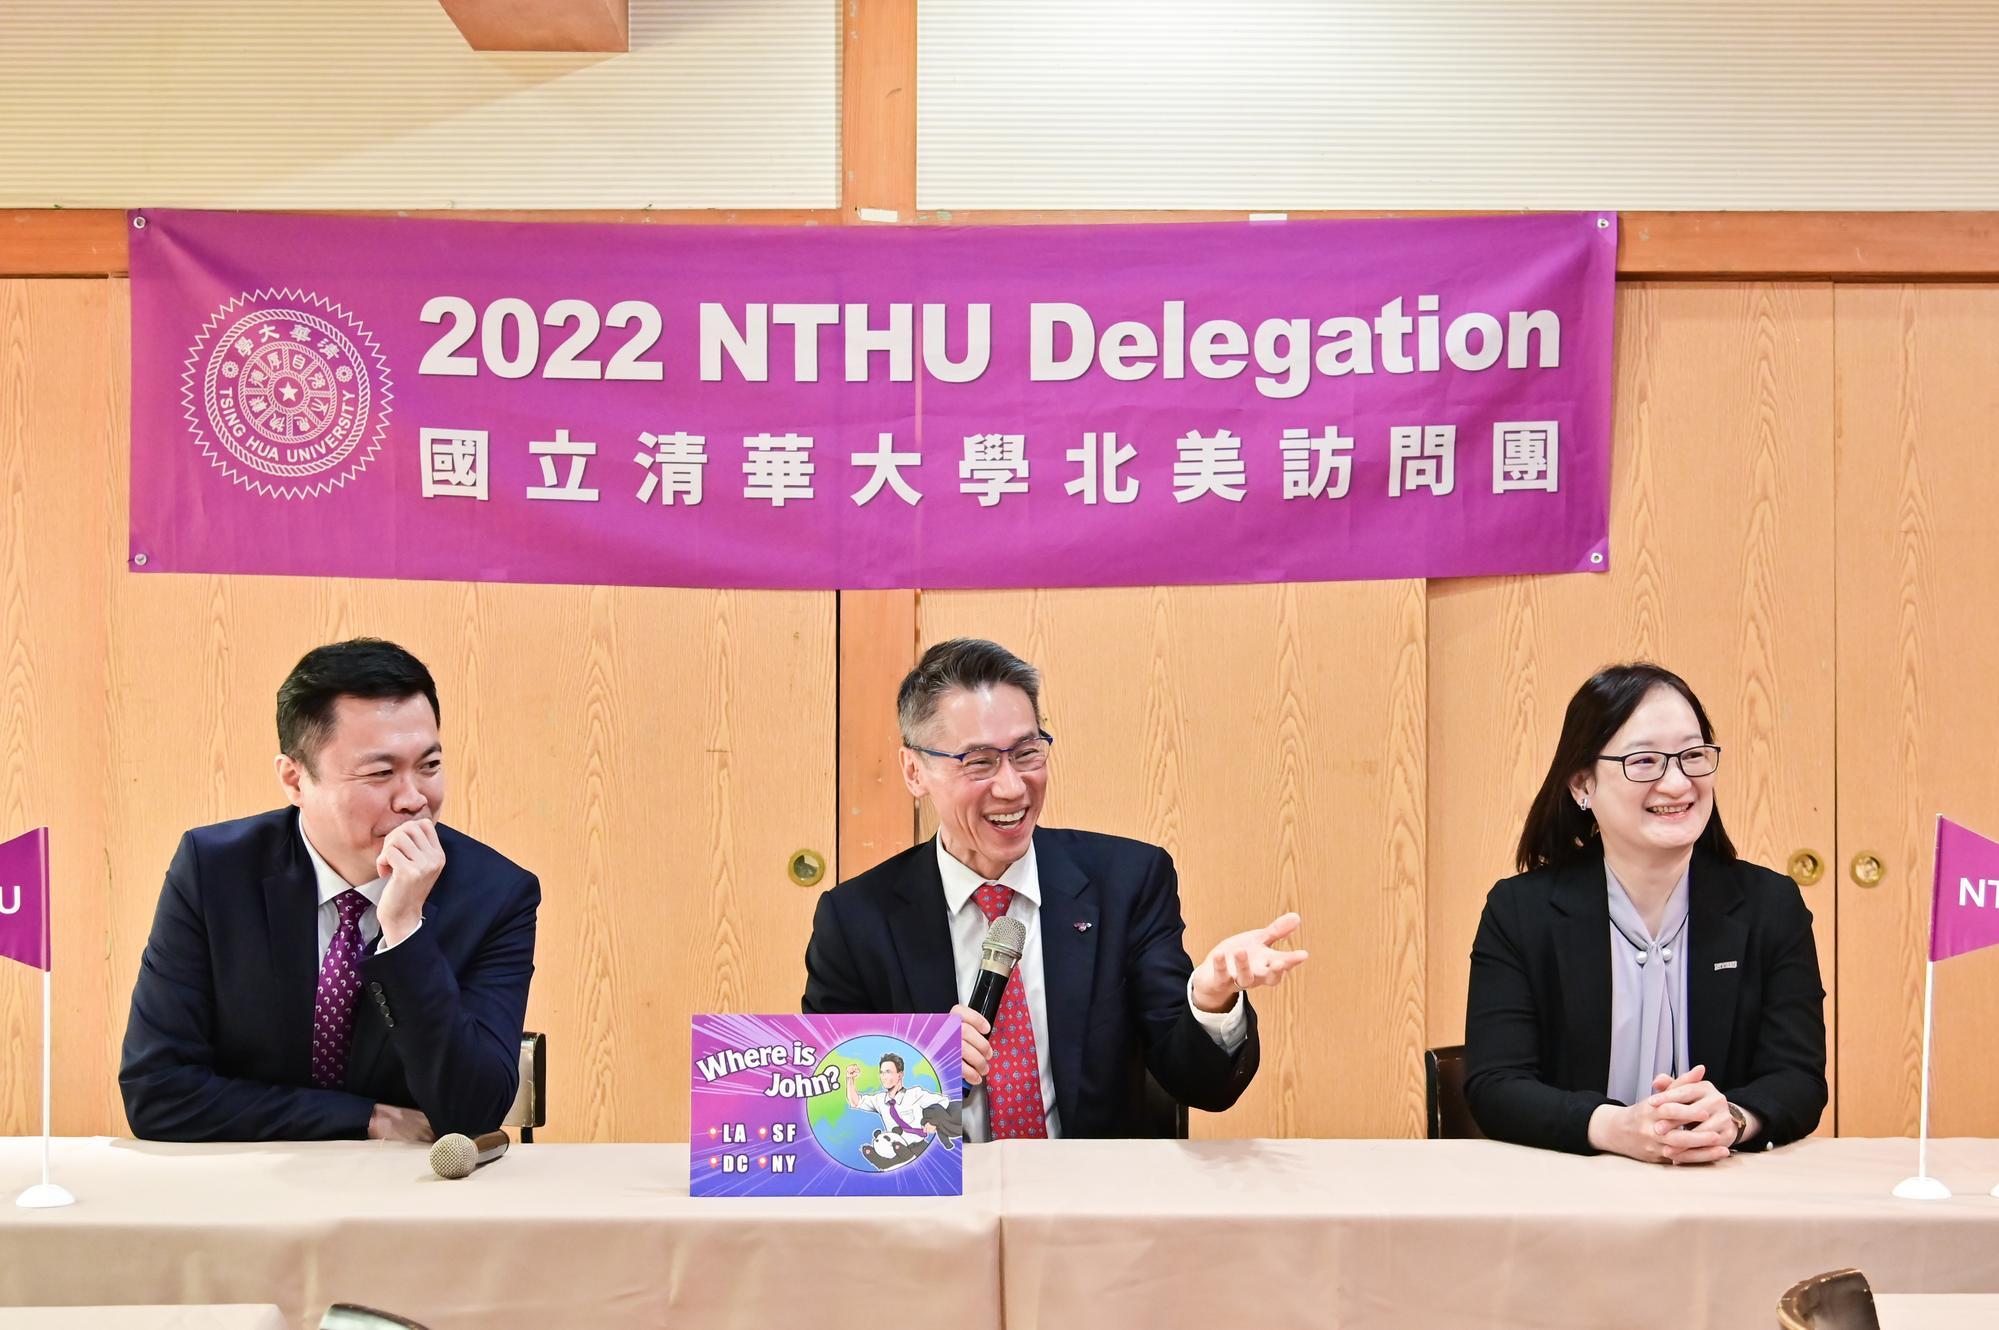 NTHU delegation members Kao (center), Alumni Service Center director Ming-yen Lu (呂明諺) (left), and special assistant to the president Chia-Yu Huang (黃嘉瑜).